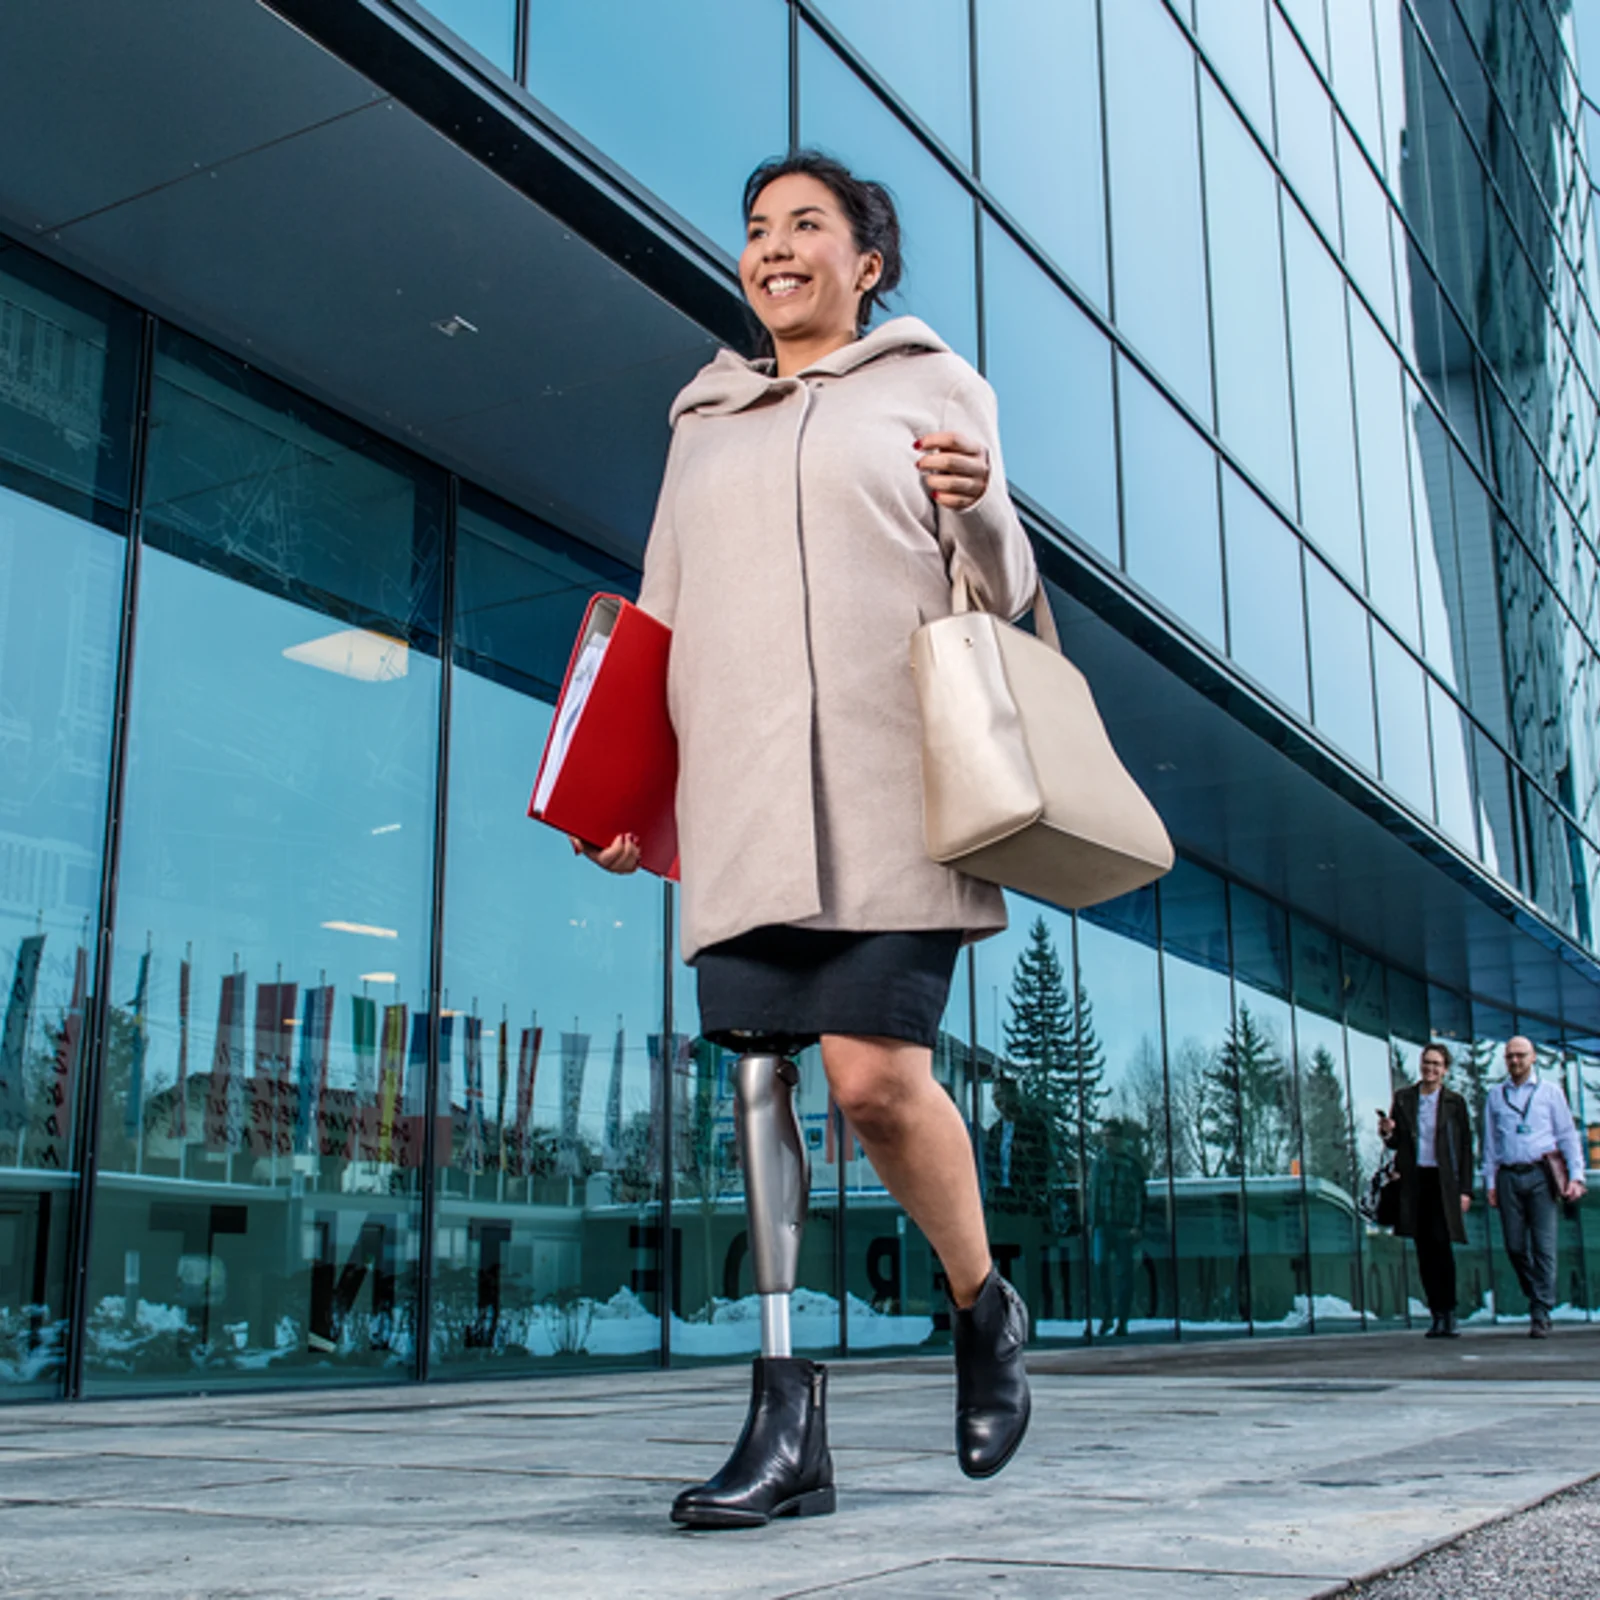 Woman with the C-leg prosthesis on her way to work.